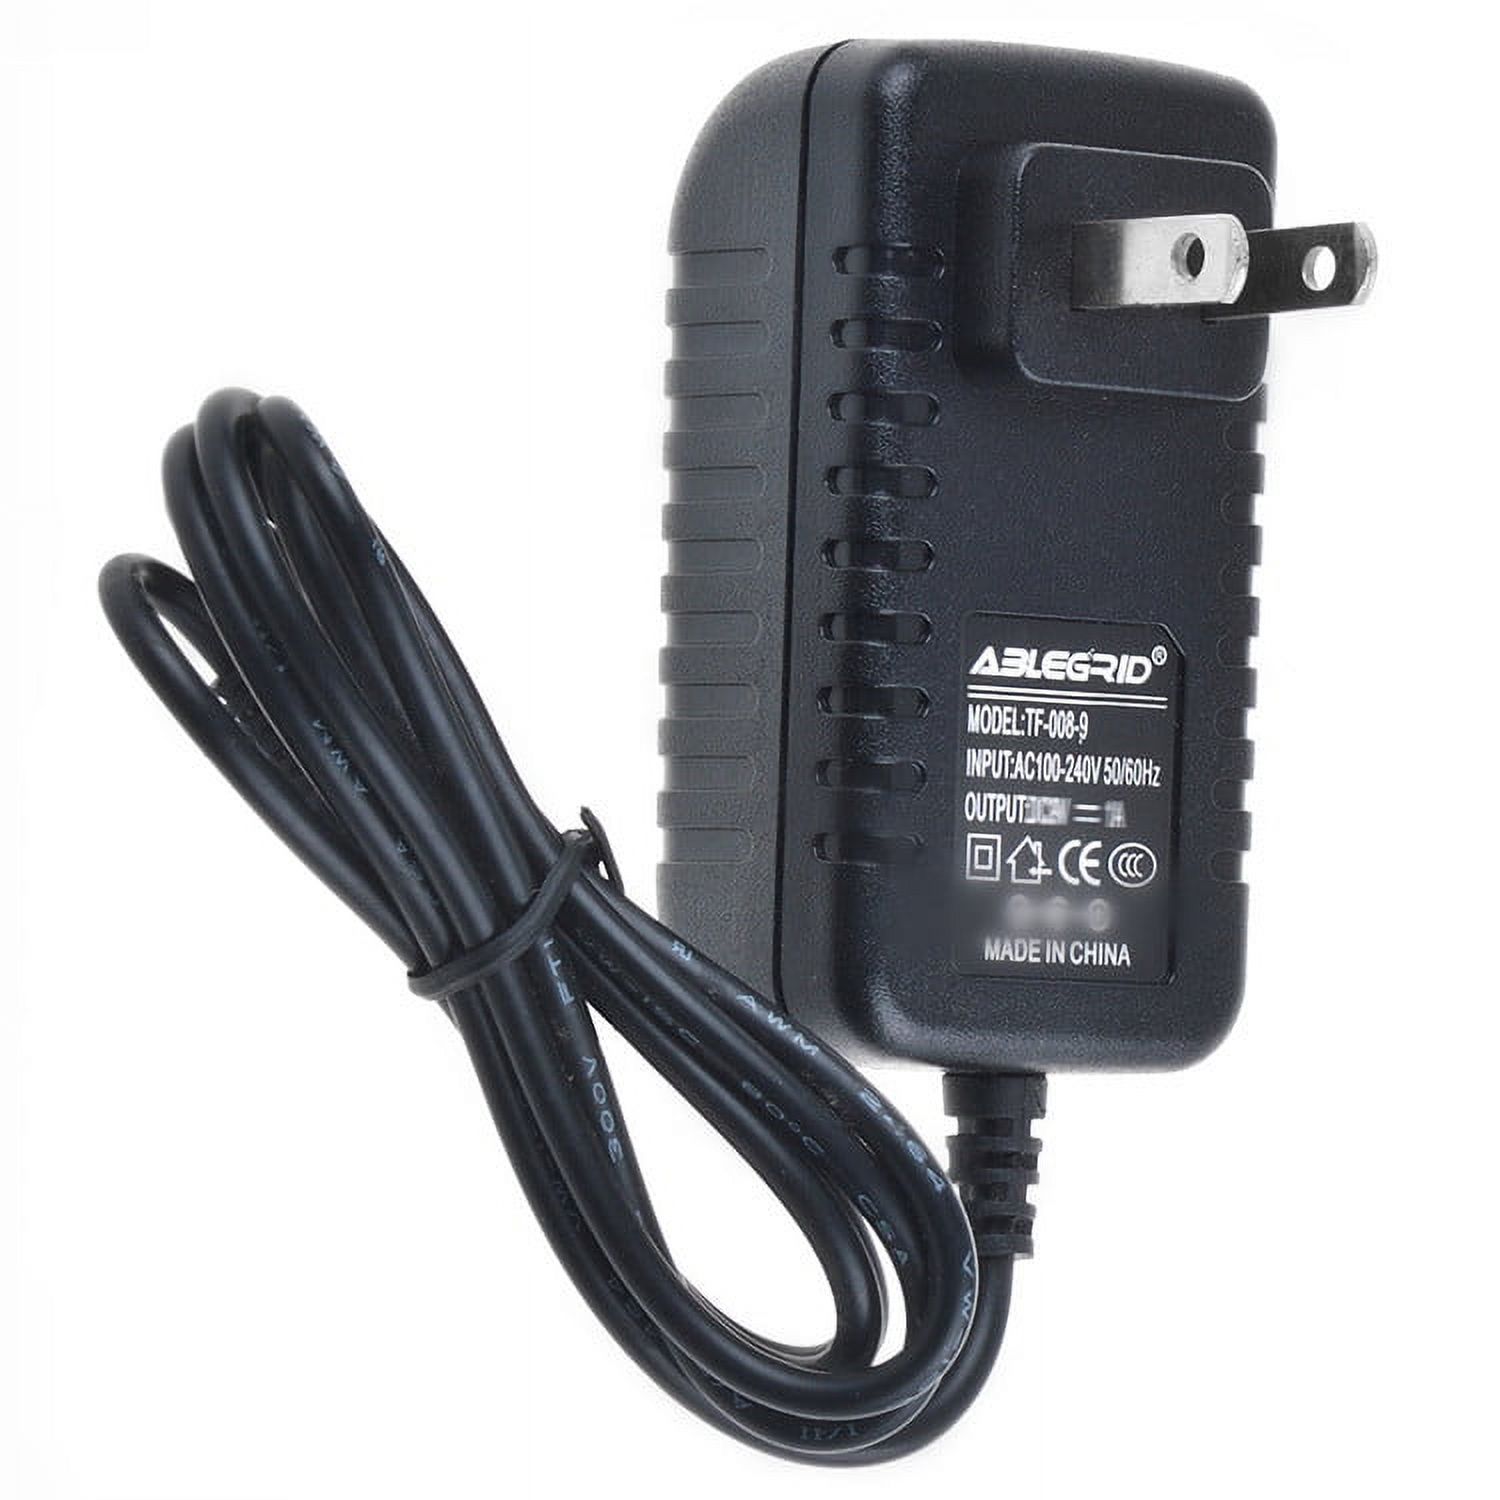 ABLEGRID AC / DC Adapter For JBL YJS020F-1201500D JEMBE WIRELESS Switching Power Supply Cord Cable PS Charger Mains PSU - image 1 of 3